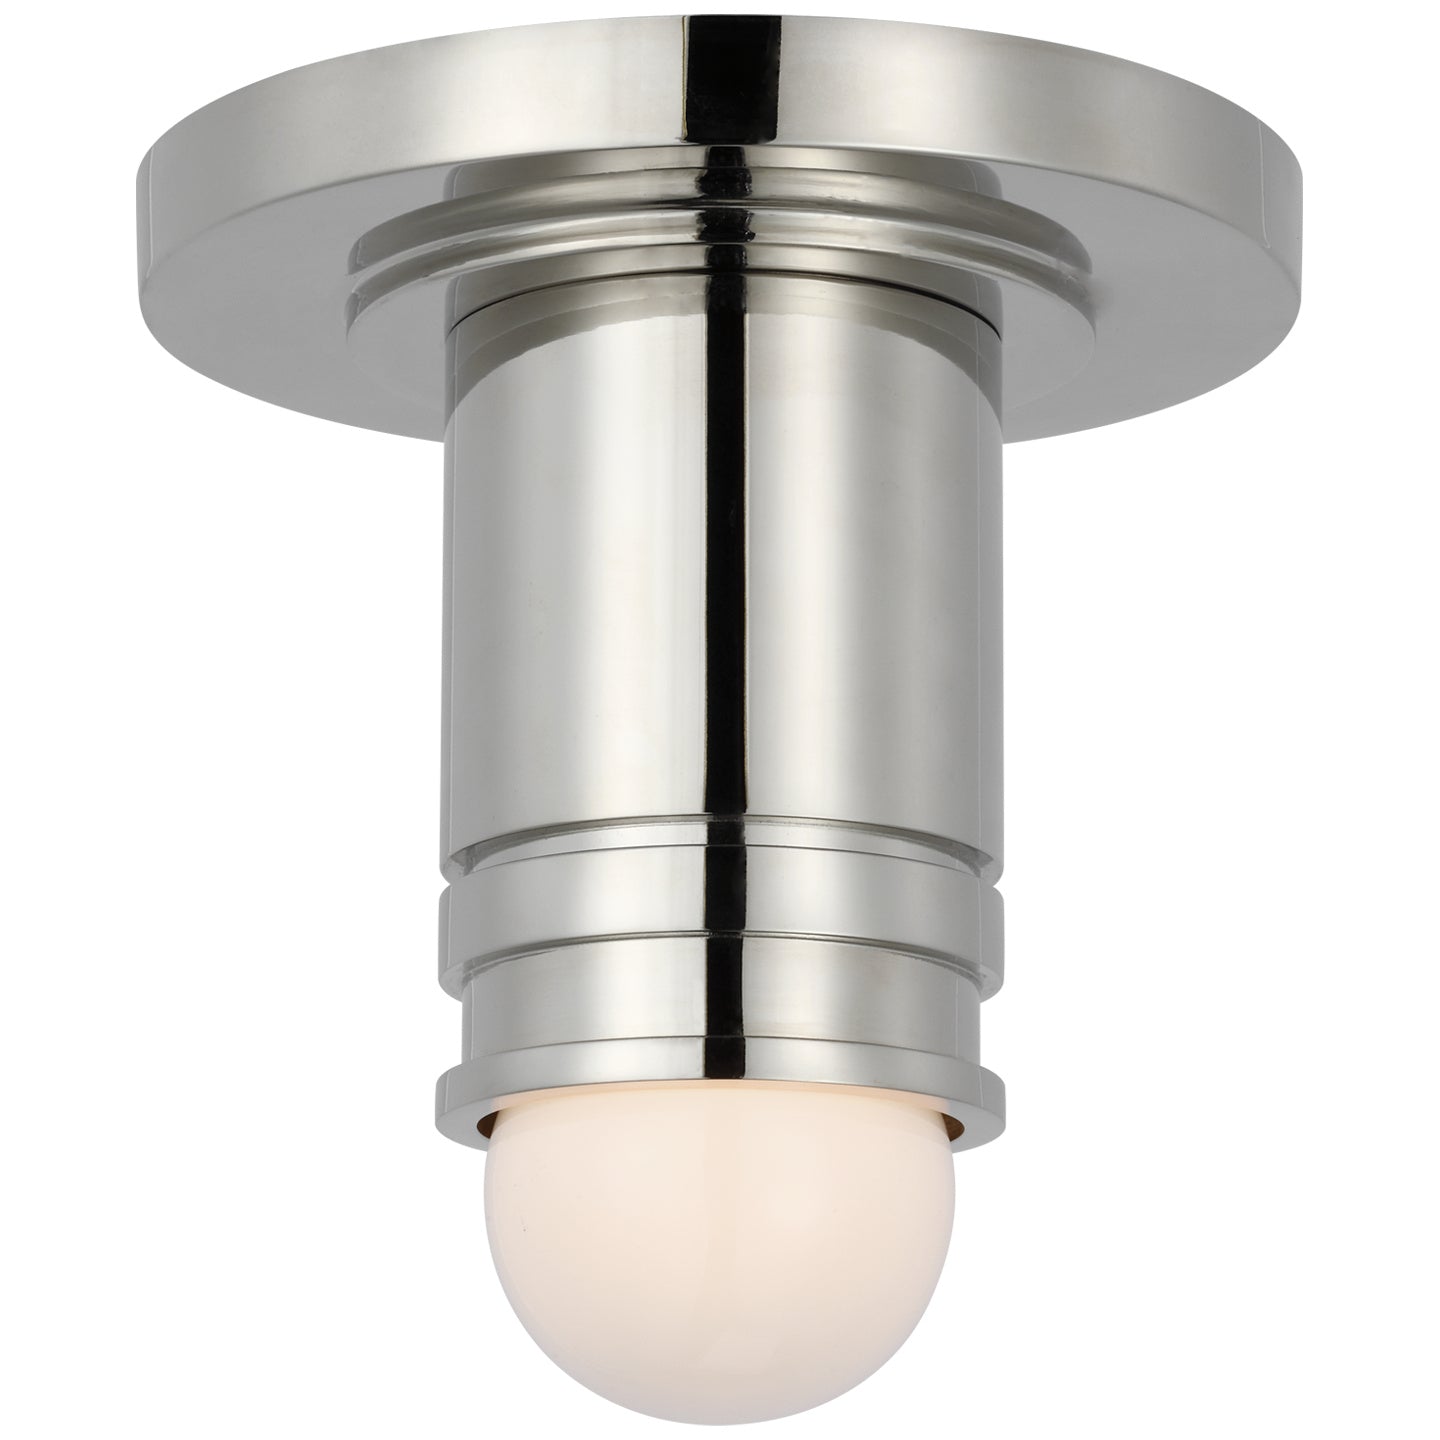 Load image into Gallery viewer, Visual Comfort Signature - TOB 4360PN - LED Flush Mount - Top Hat - Polished Nickel
